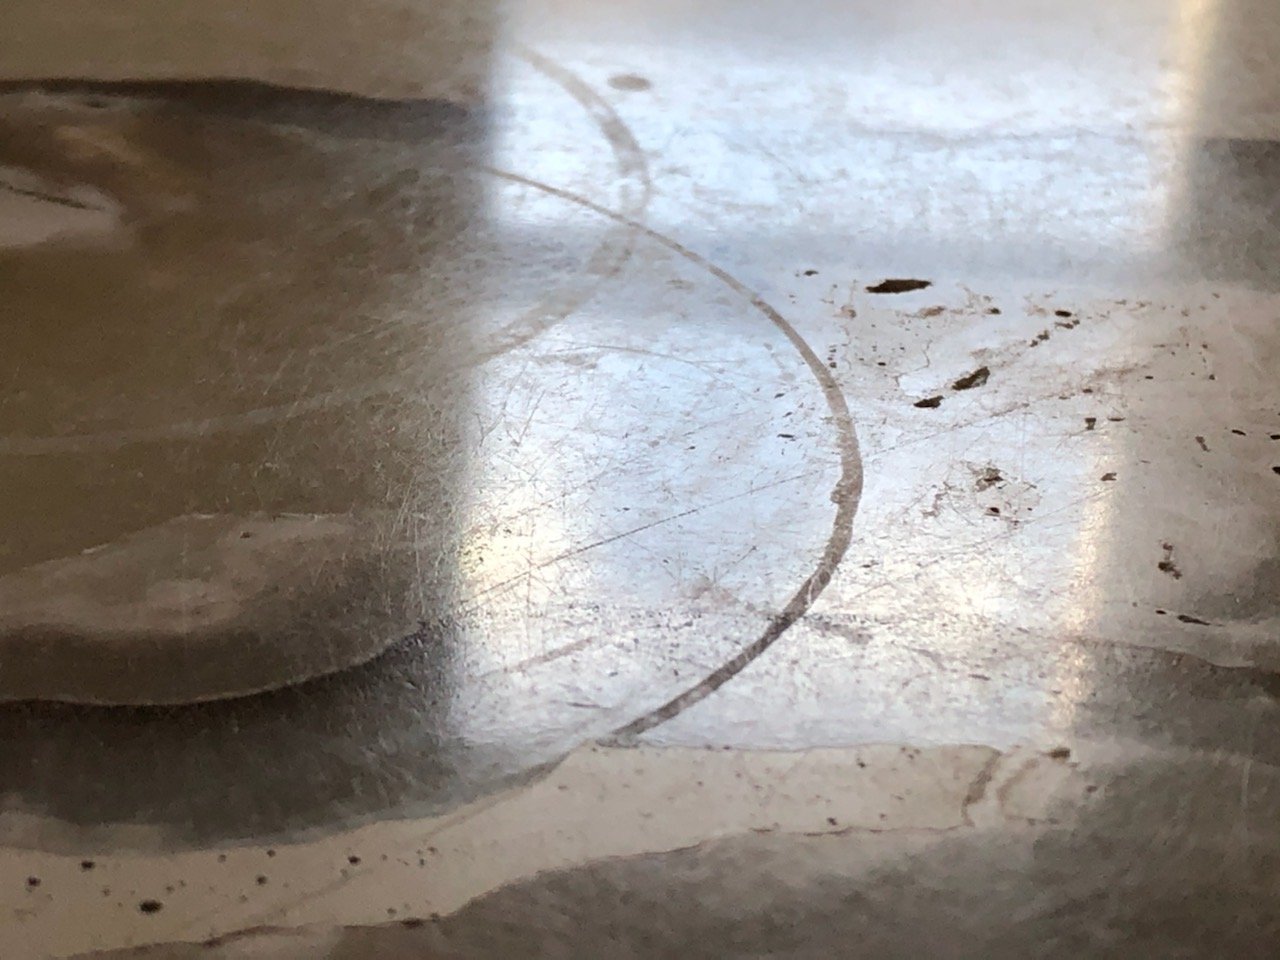 Etched effects of the head of the polishing machine on the finishing of the stone as an error.